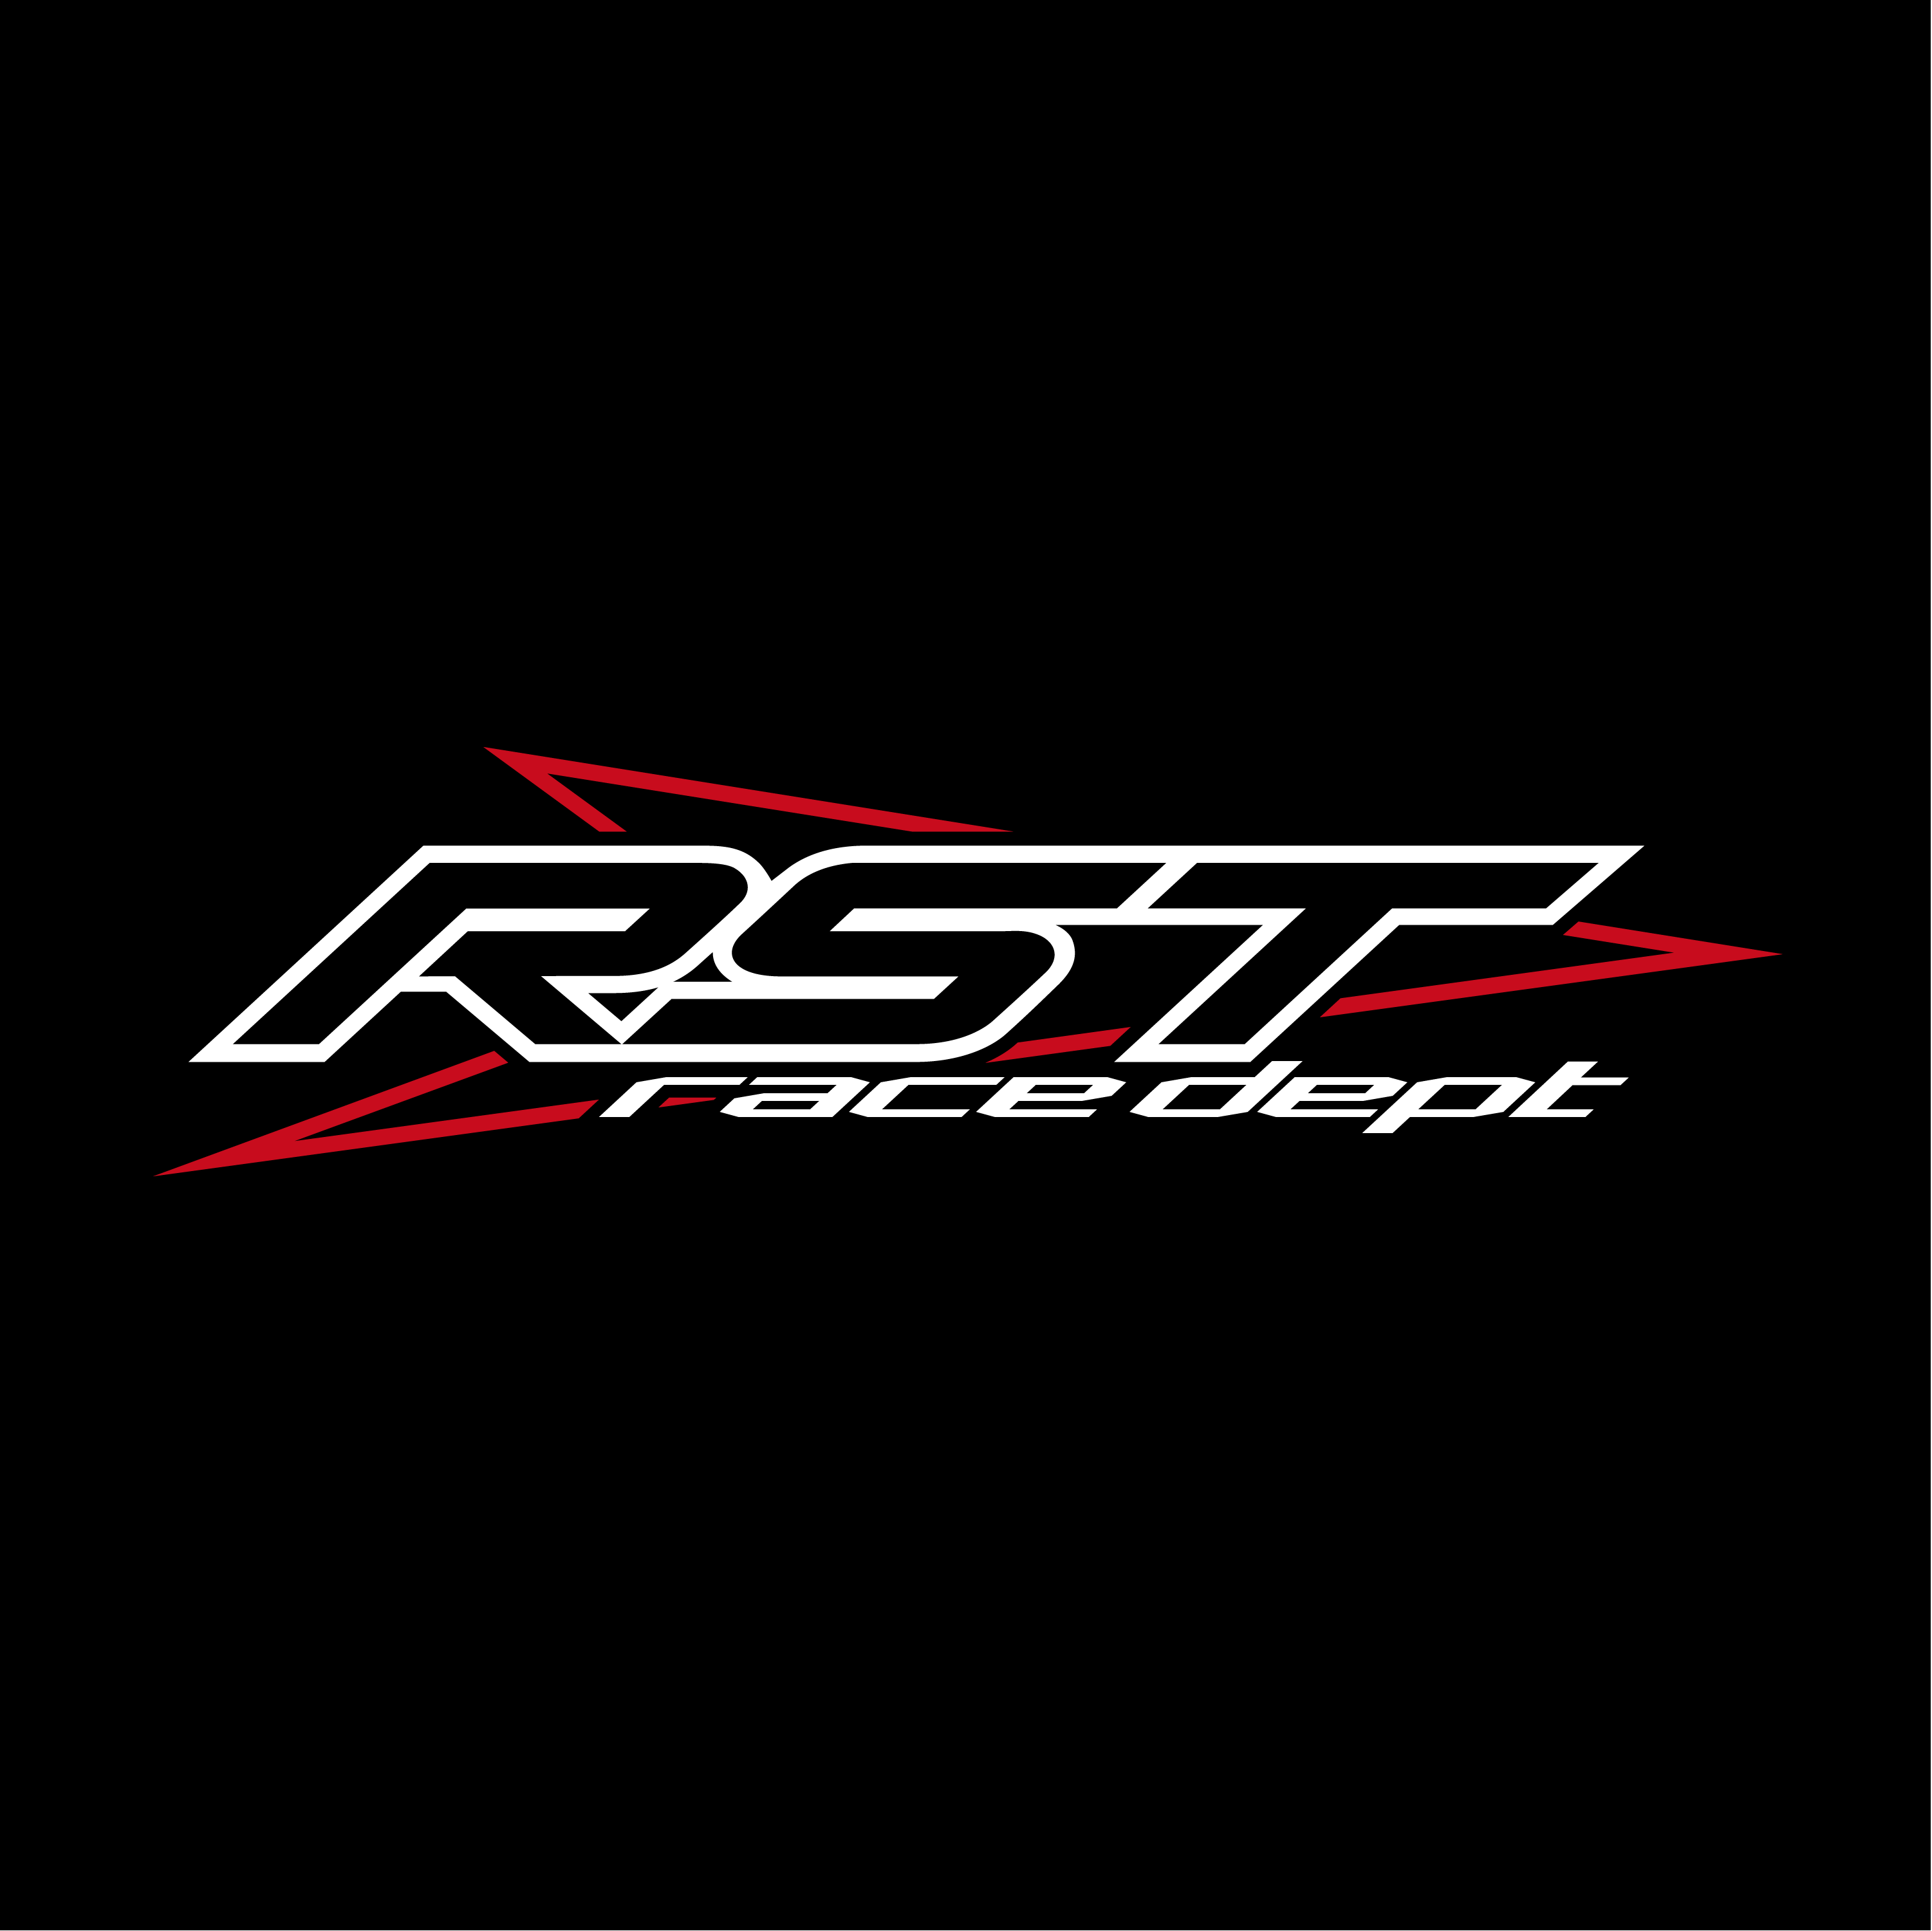 Club Image for RST CYCLEDIVISION